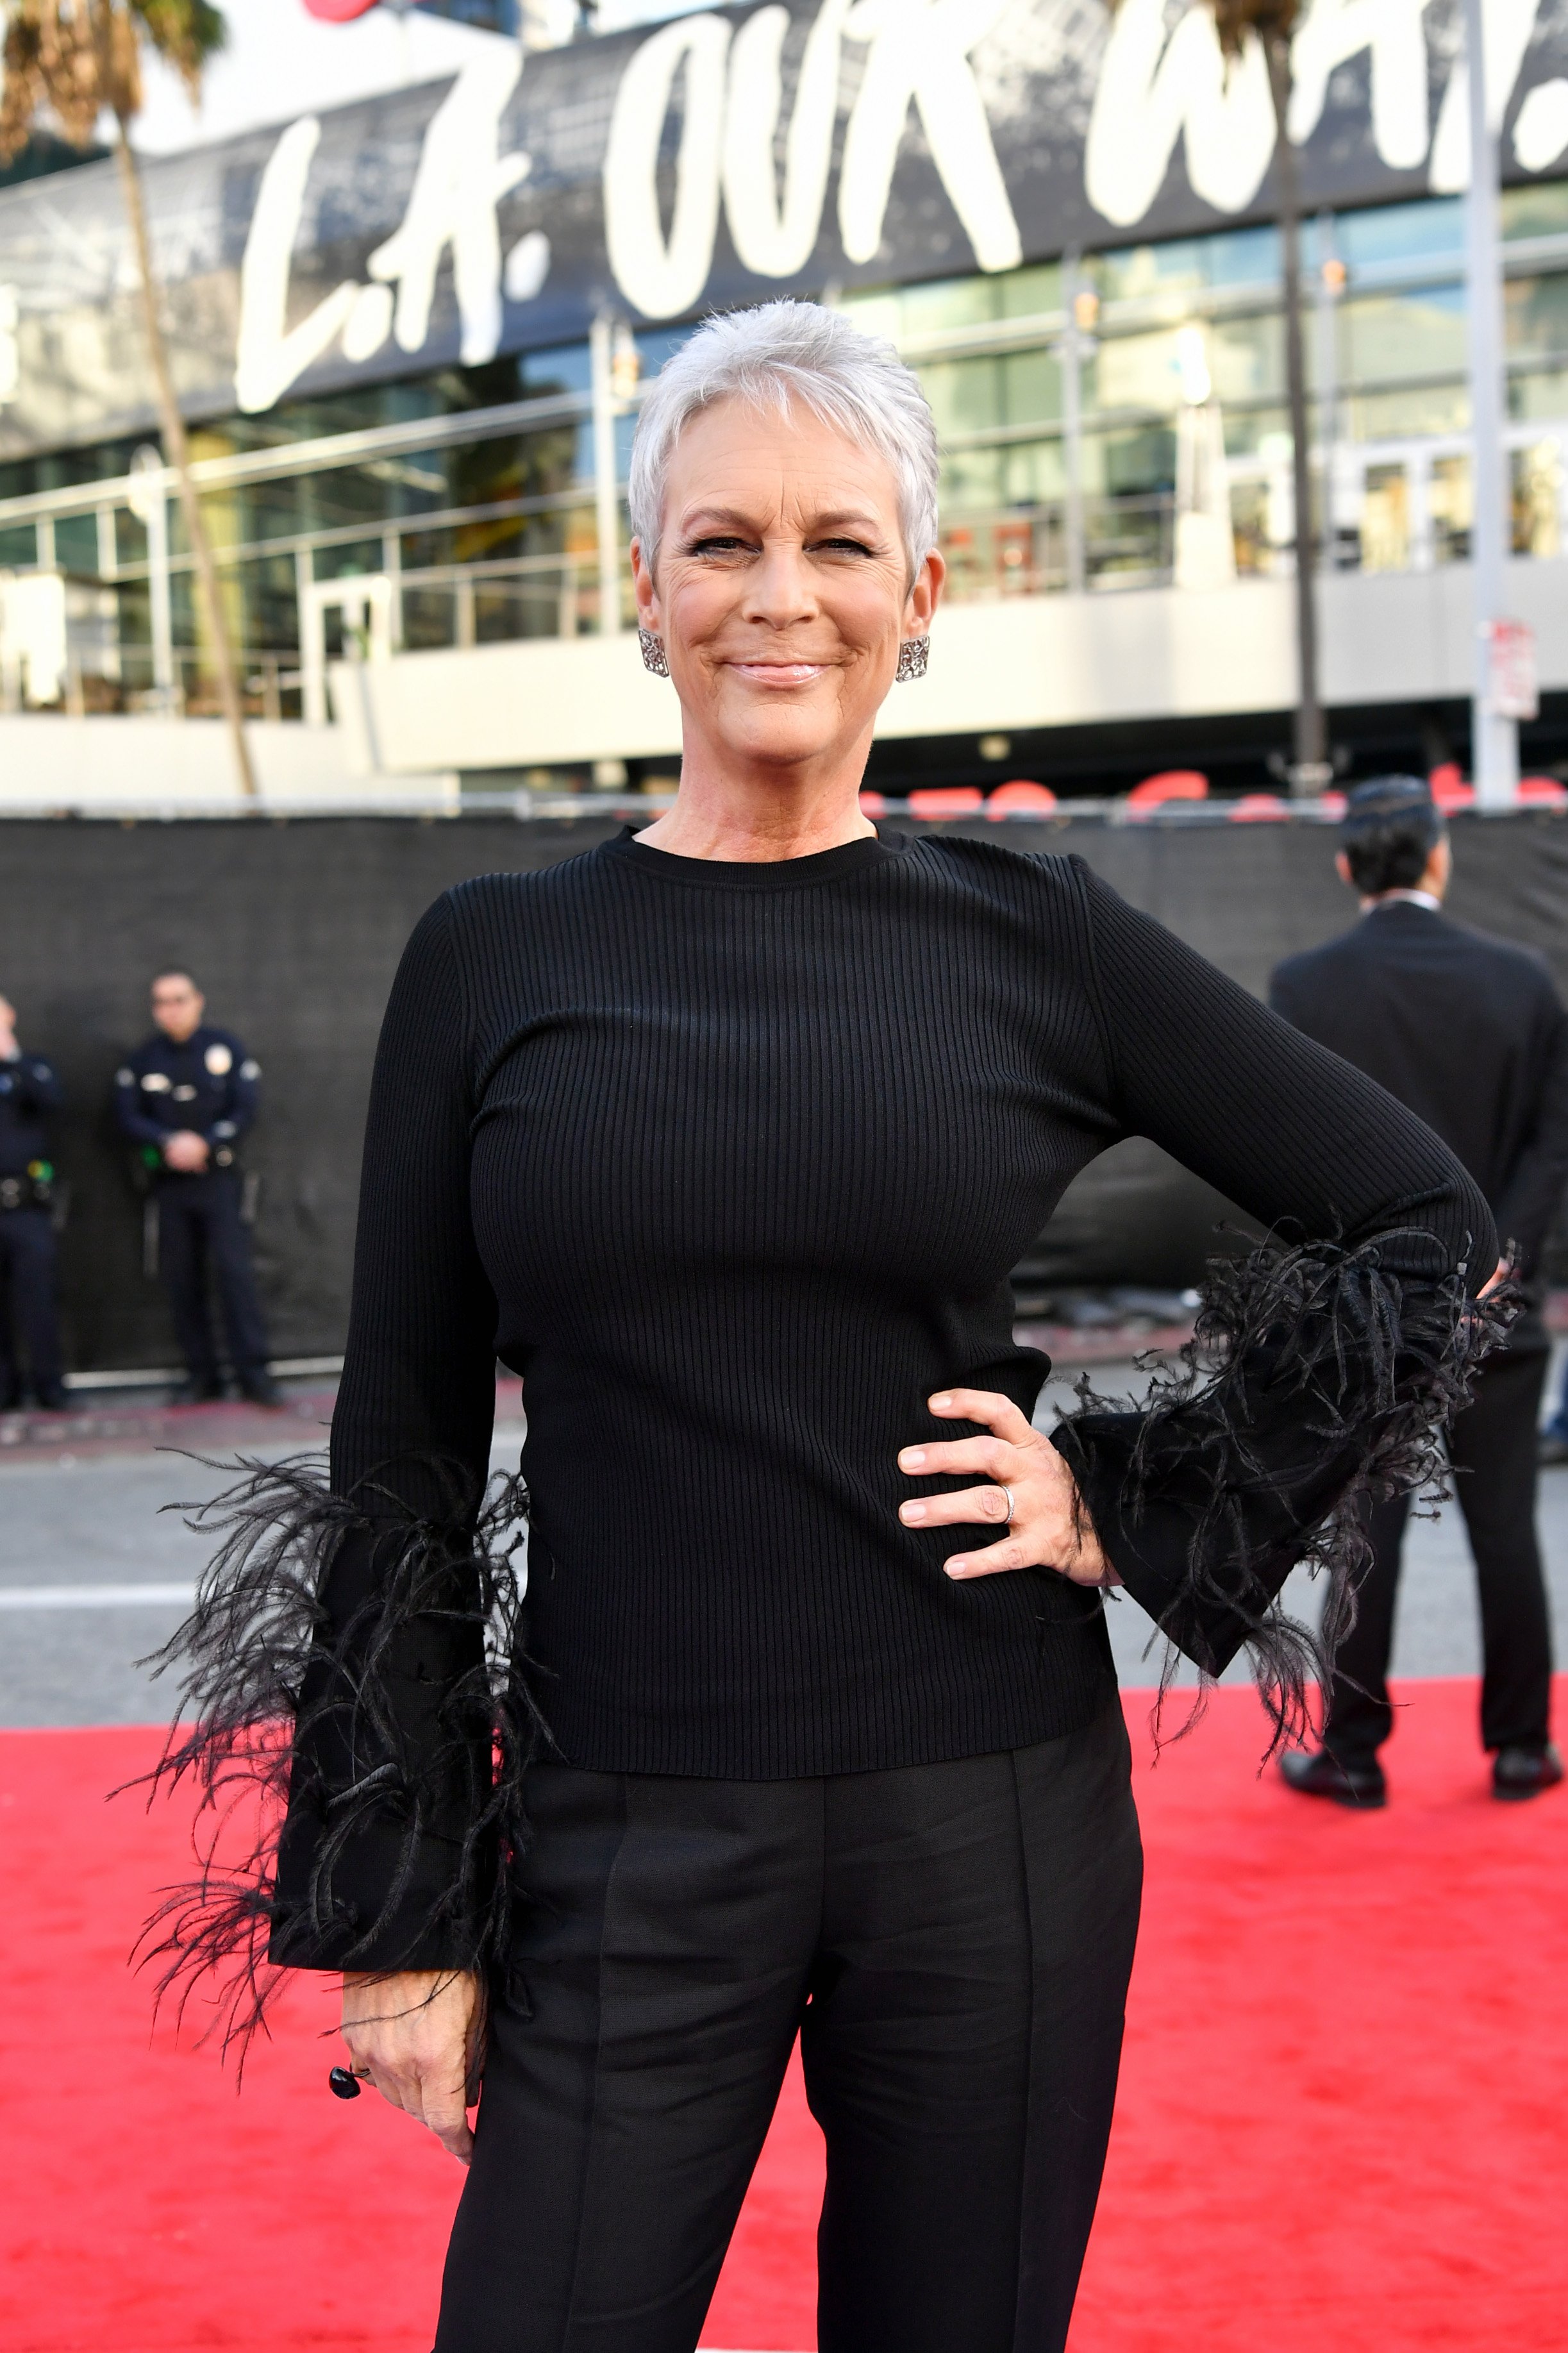  Jamie Lee Curtis attends the 2019 American Music Awards at Microsoft Theater on November 24, 2019  | Photo: GettyImages